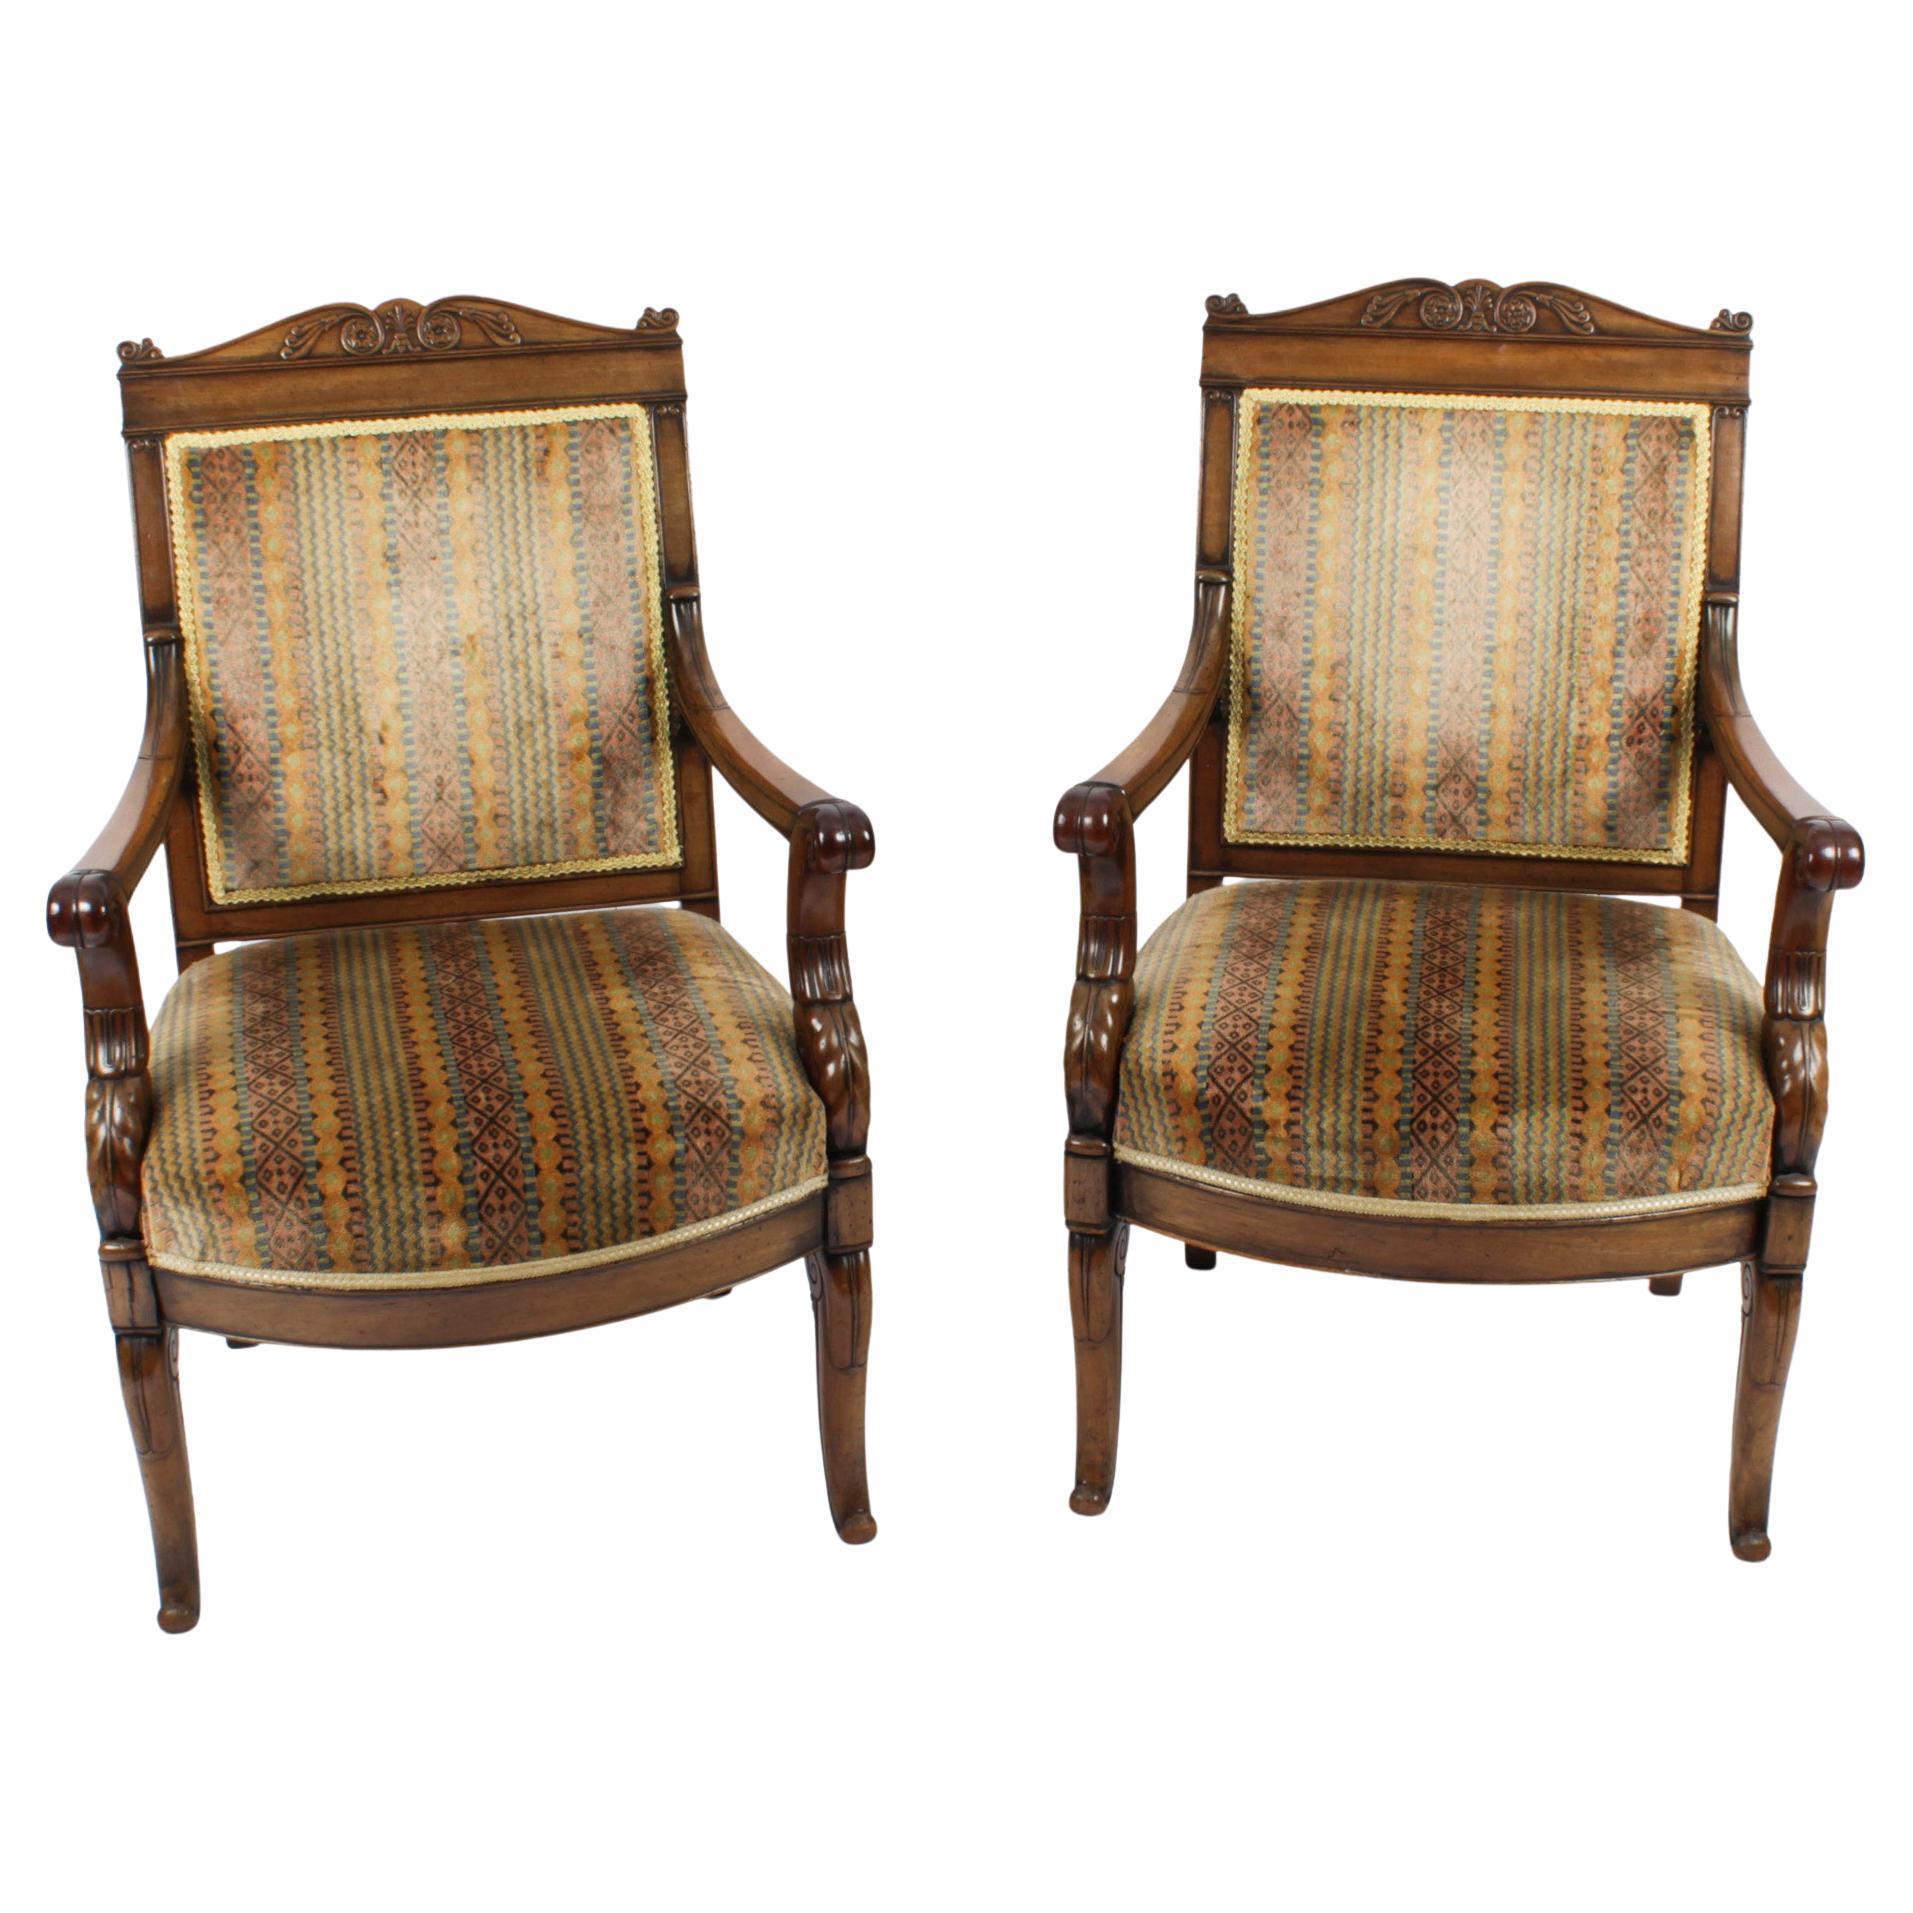 Antique Pair French Empire Armchair Fauteuils Chairs, 19th Century